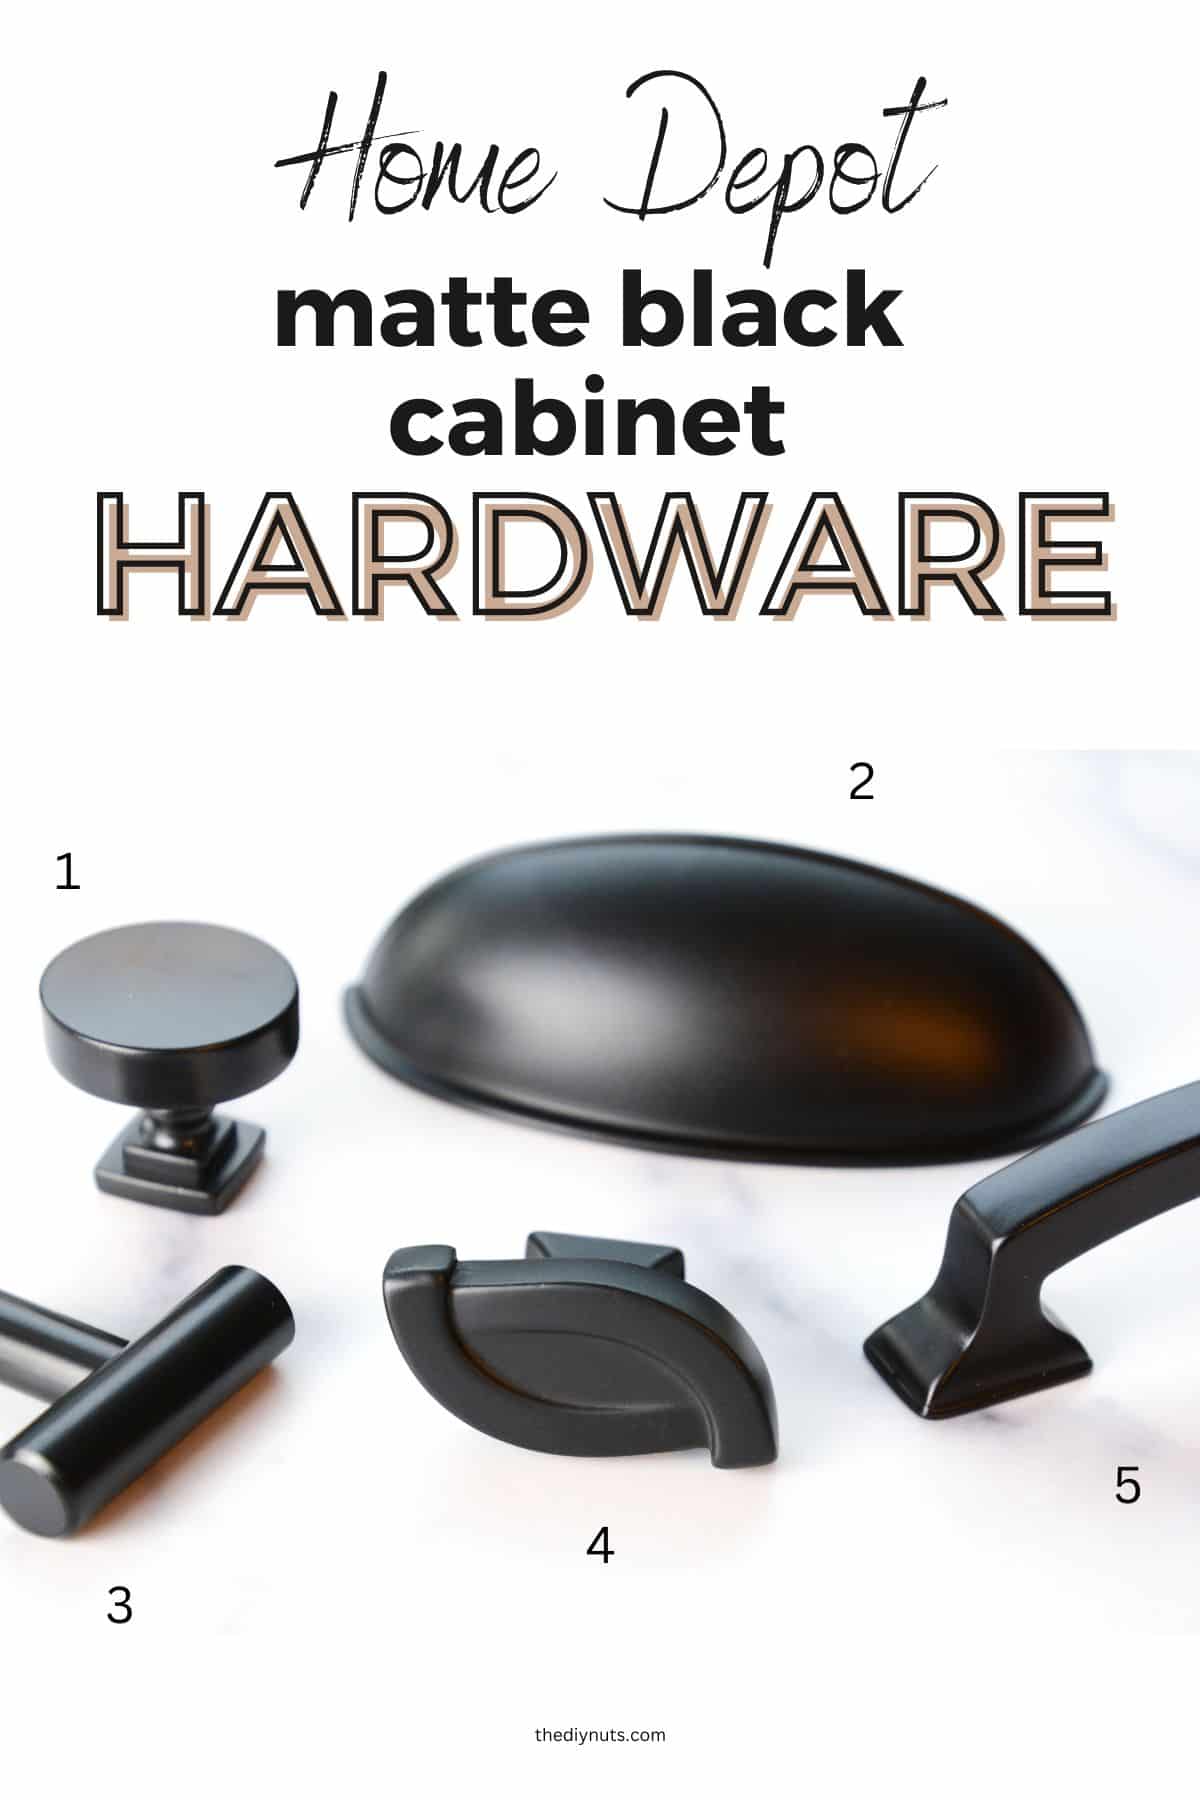 5 different matte black hardware pulls, knobs and handles with text overlay Home Depot hardware.